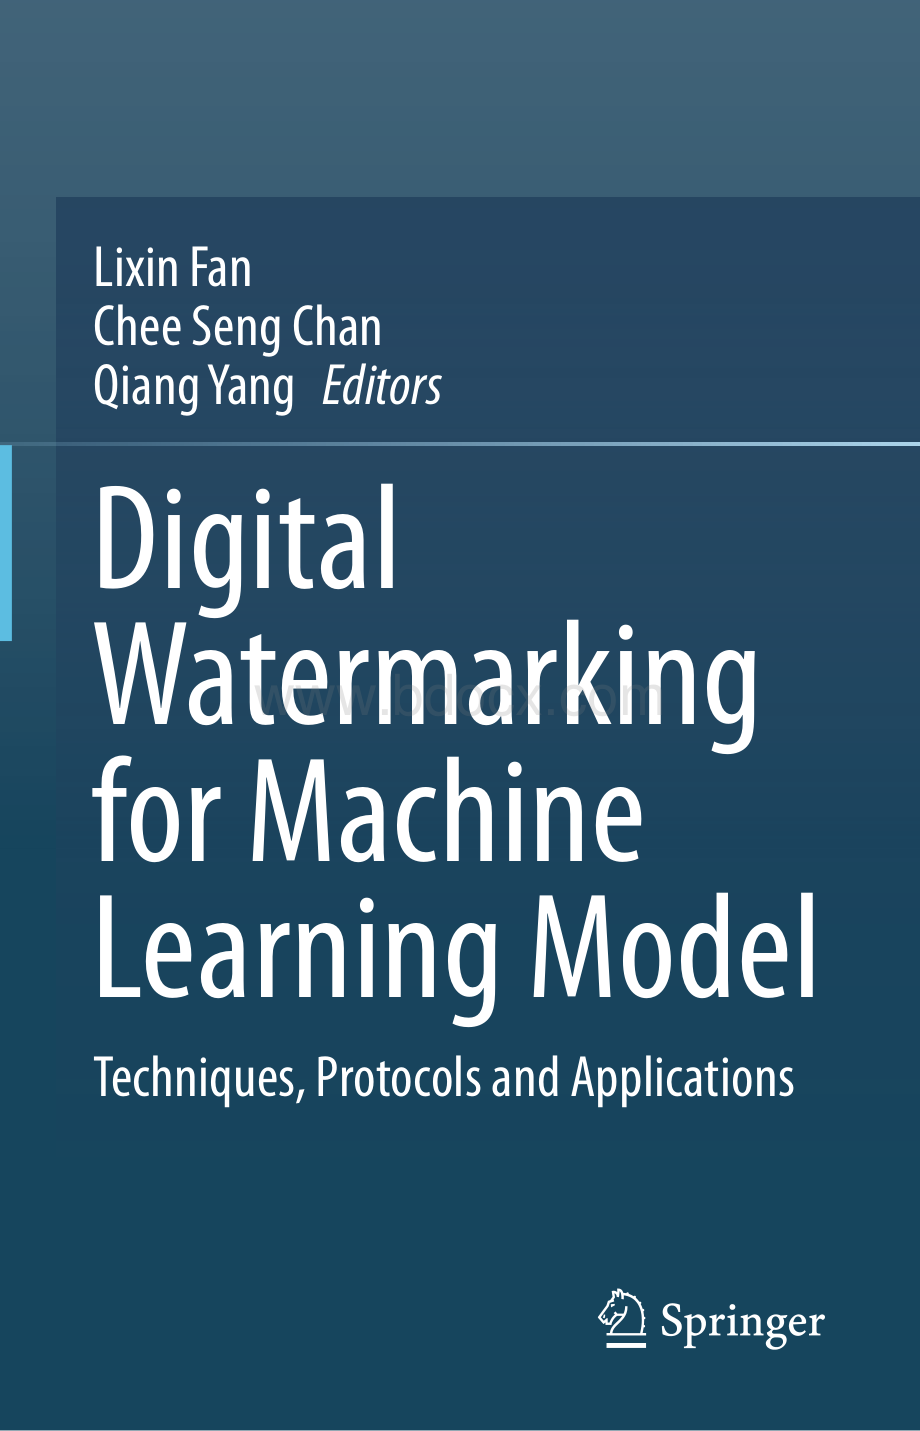 Digital Watermarking for Machine Learning Model Techniques Protocols and Applications.pdf_第1页